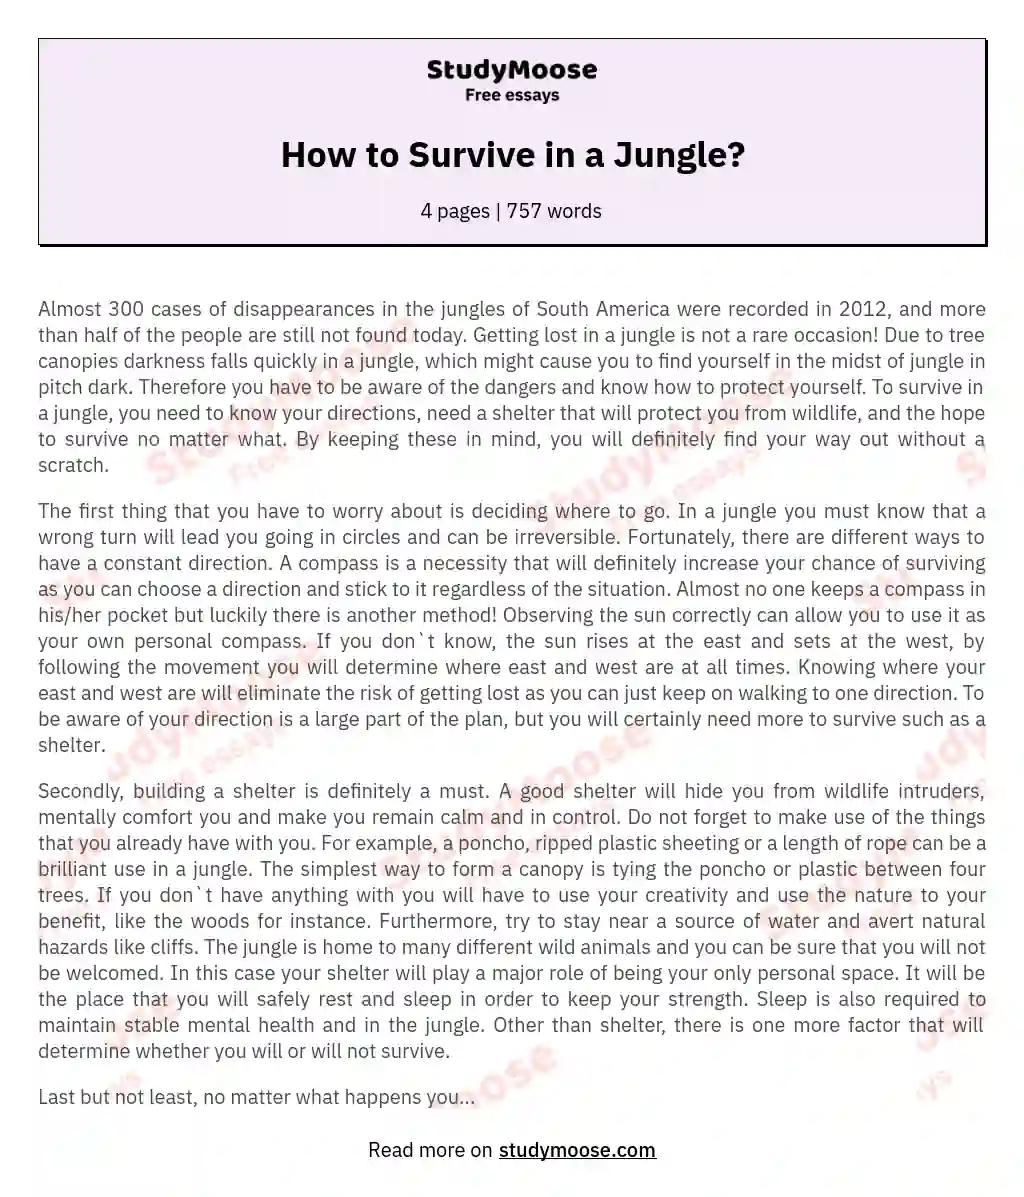 How to Survive in a Jungle? essay